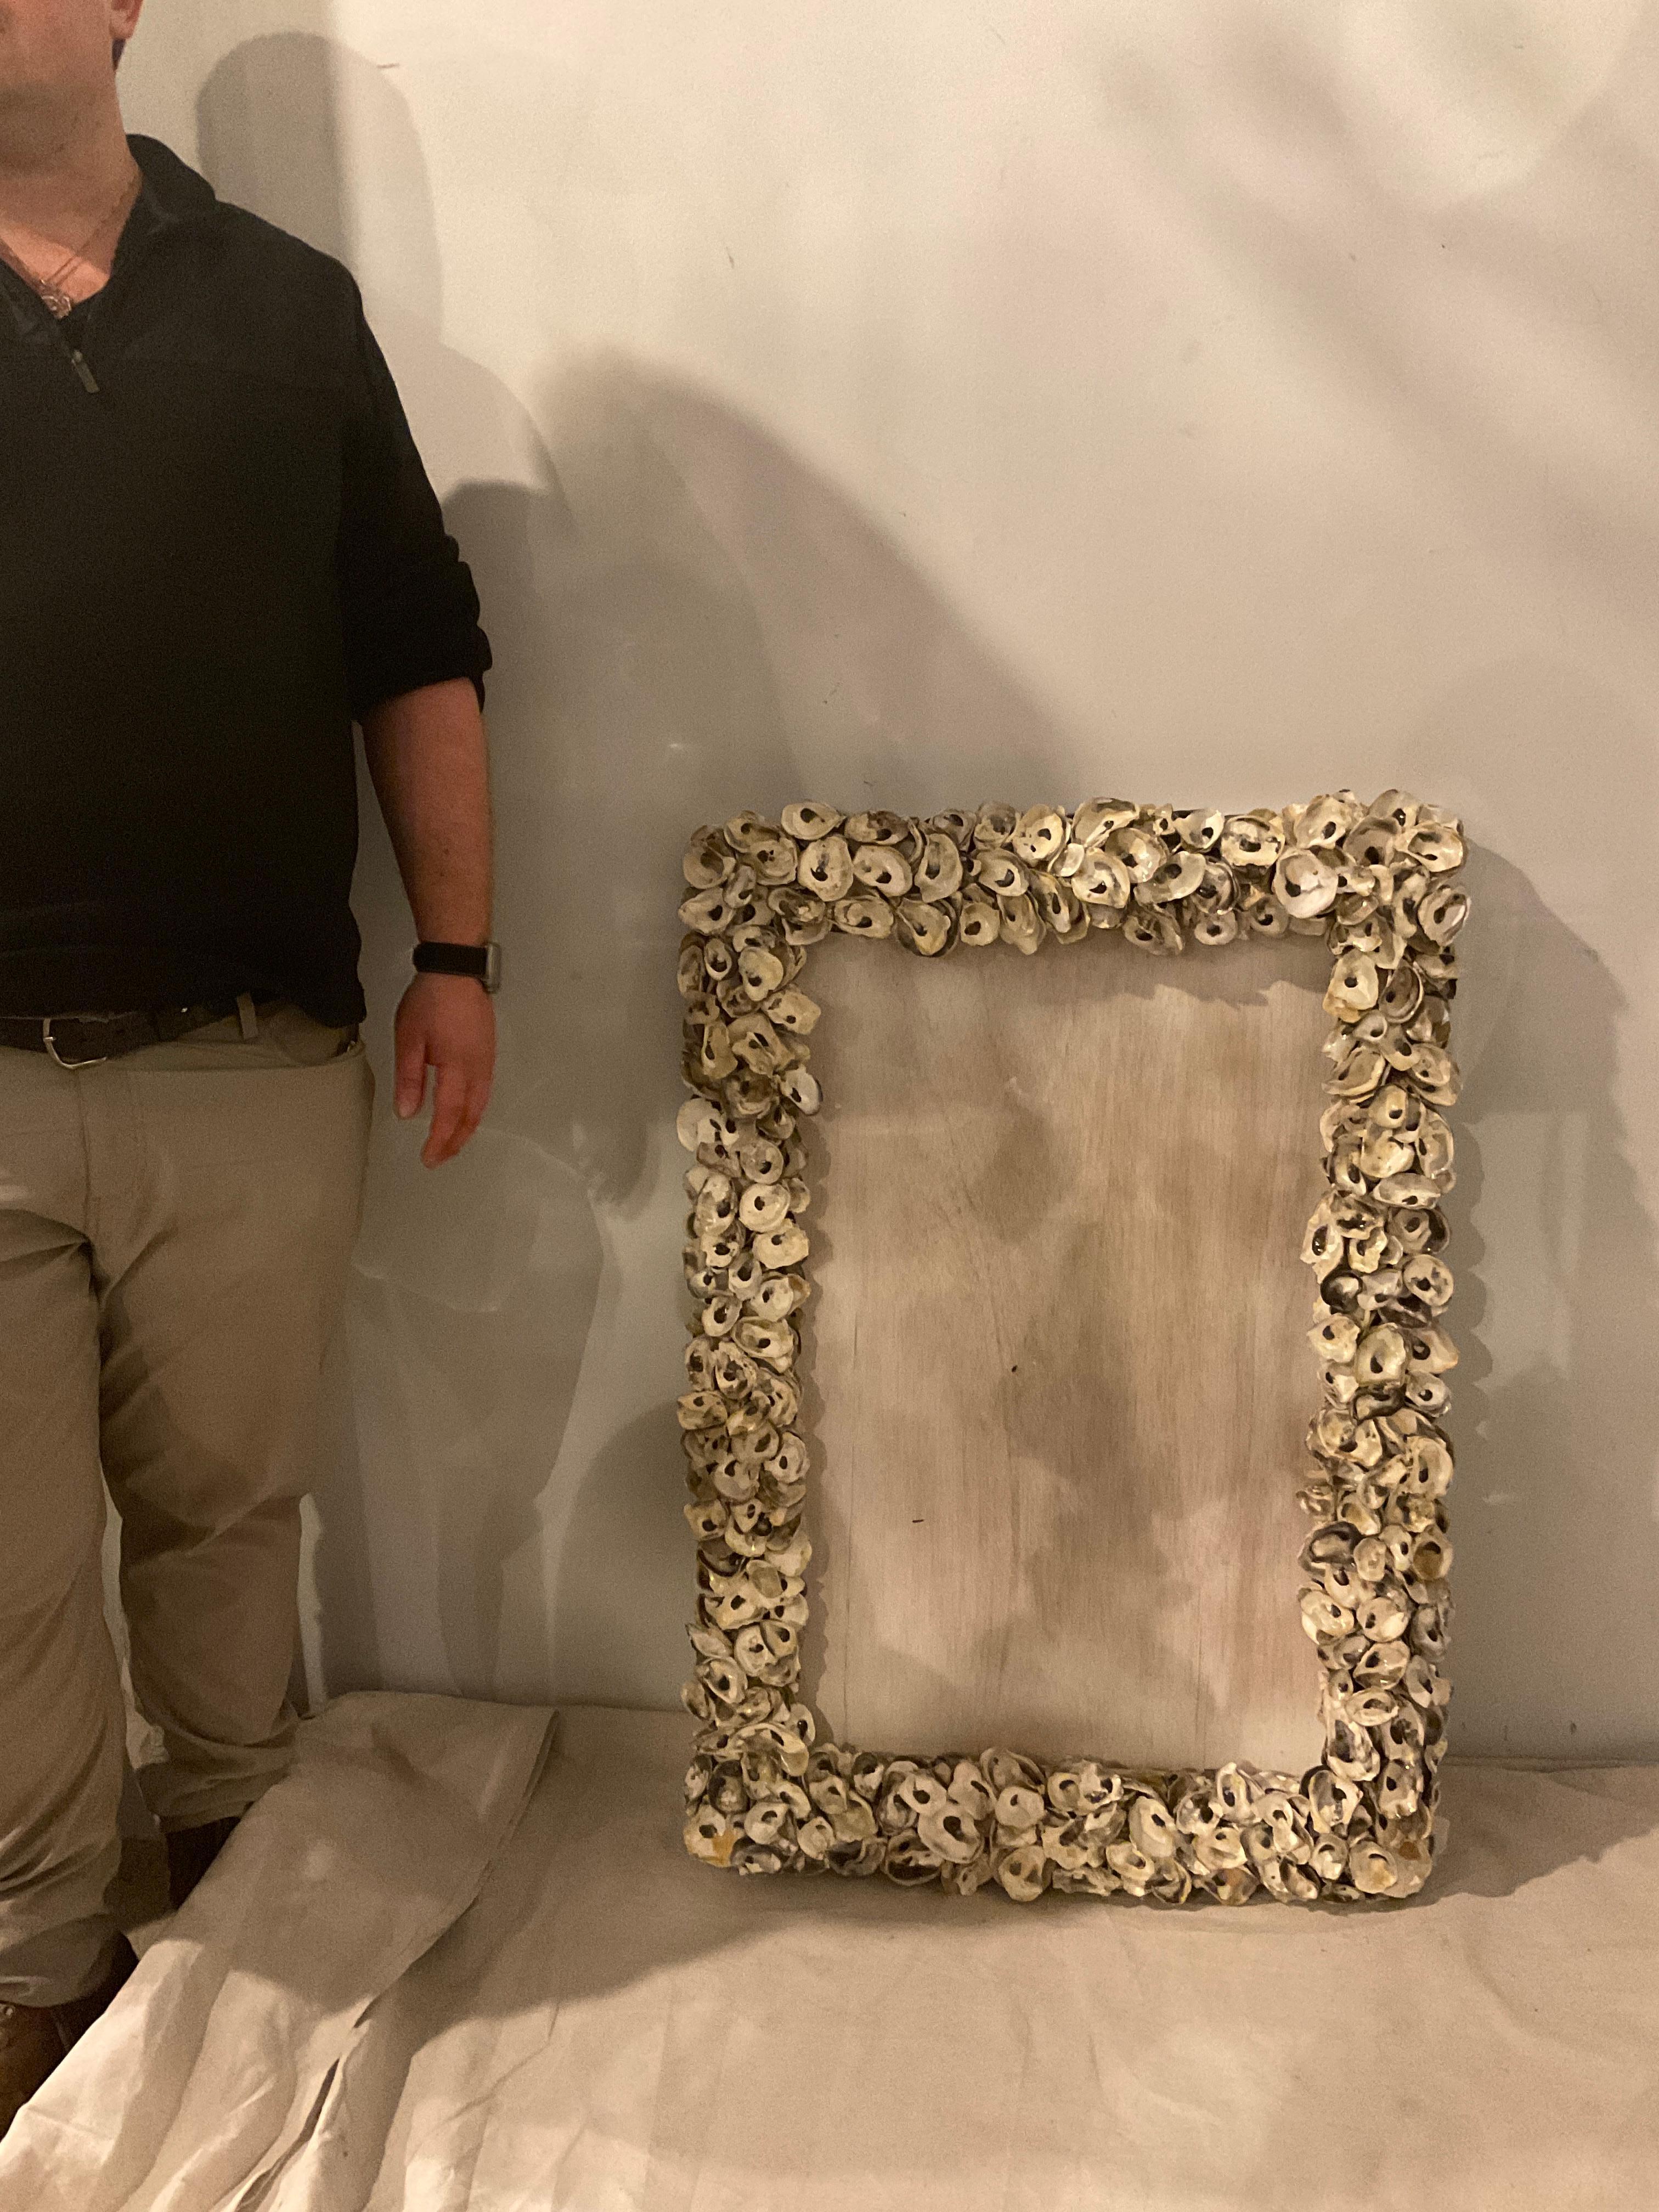 Oyster shell frame for a mirror. Handmade. There are 2 available. These frames do not include mirror. You must purchase mirror separately when you receive the frame.
Frame is new, one is still in the box. Price is 1200.00 per frame.